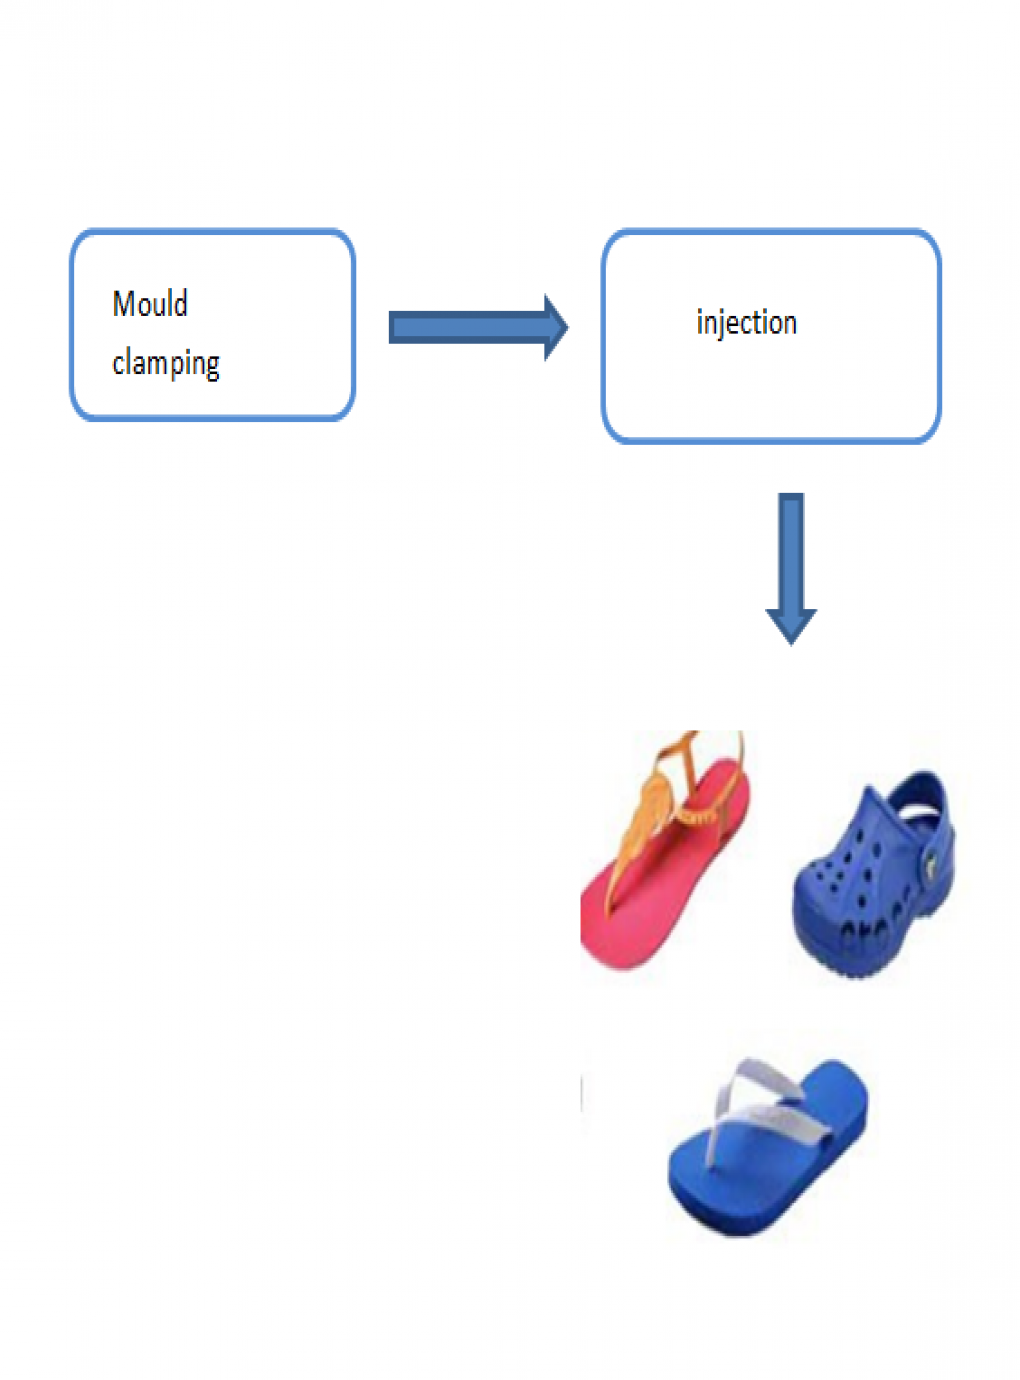 Rubber plastic slippers making machine/production line